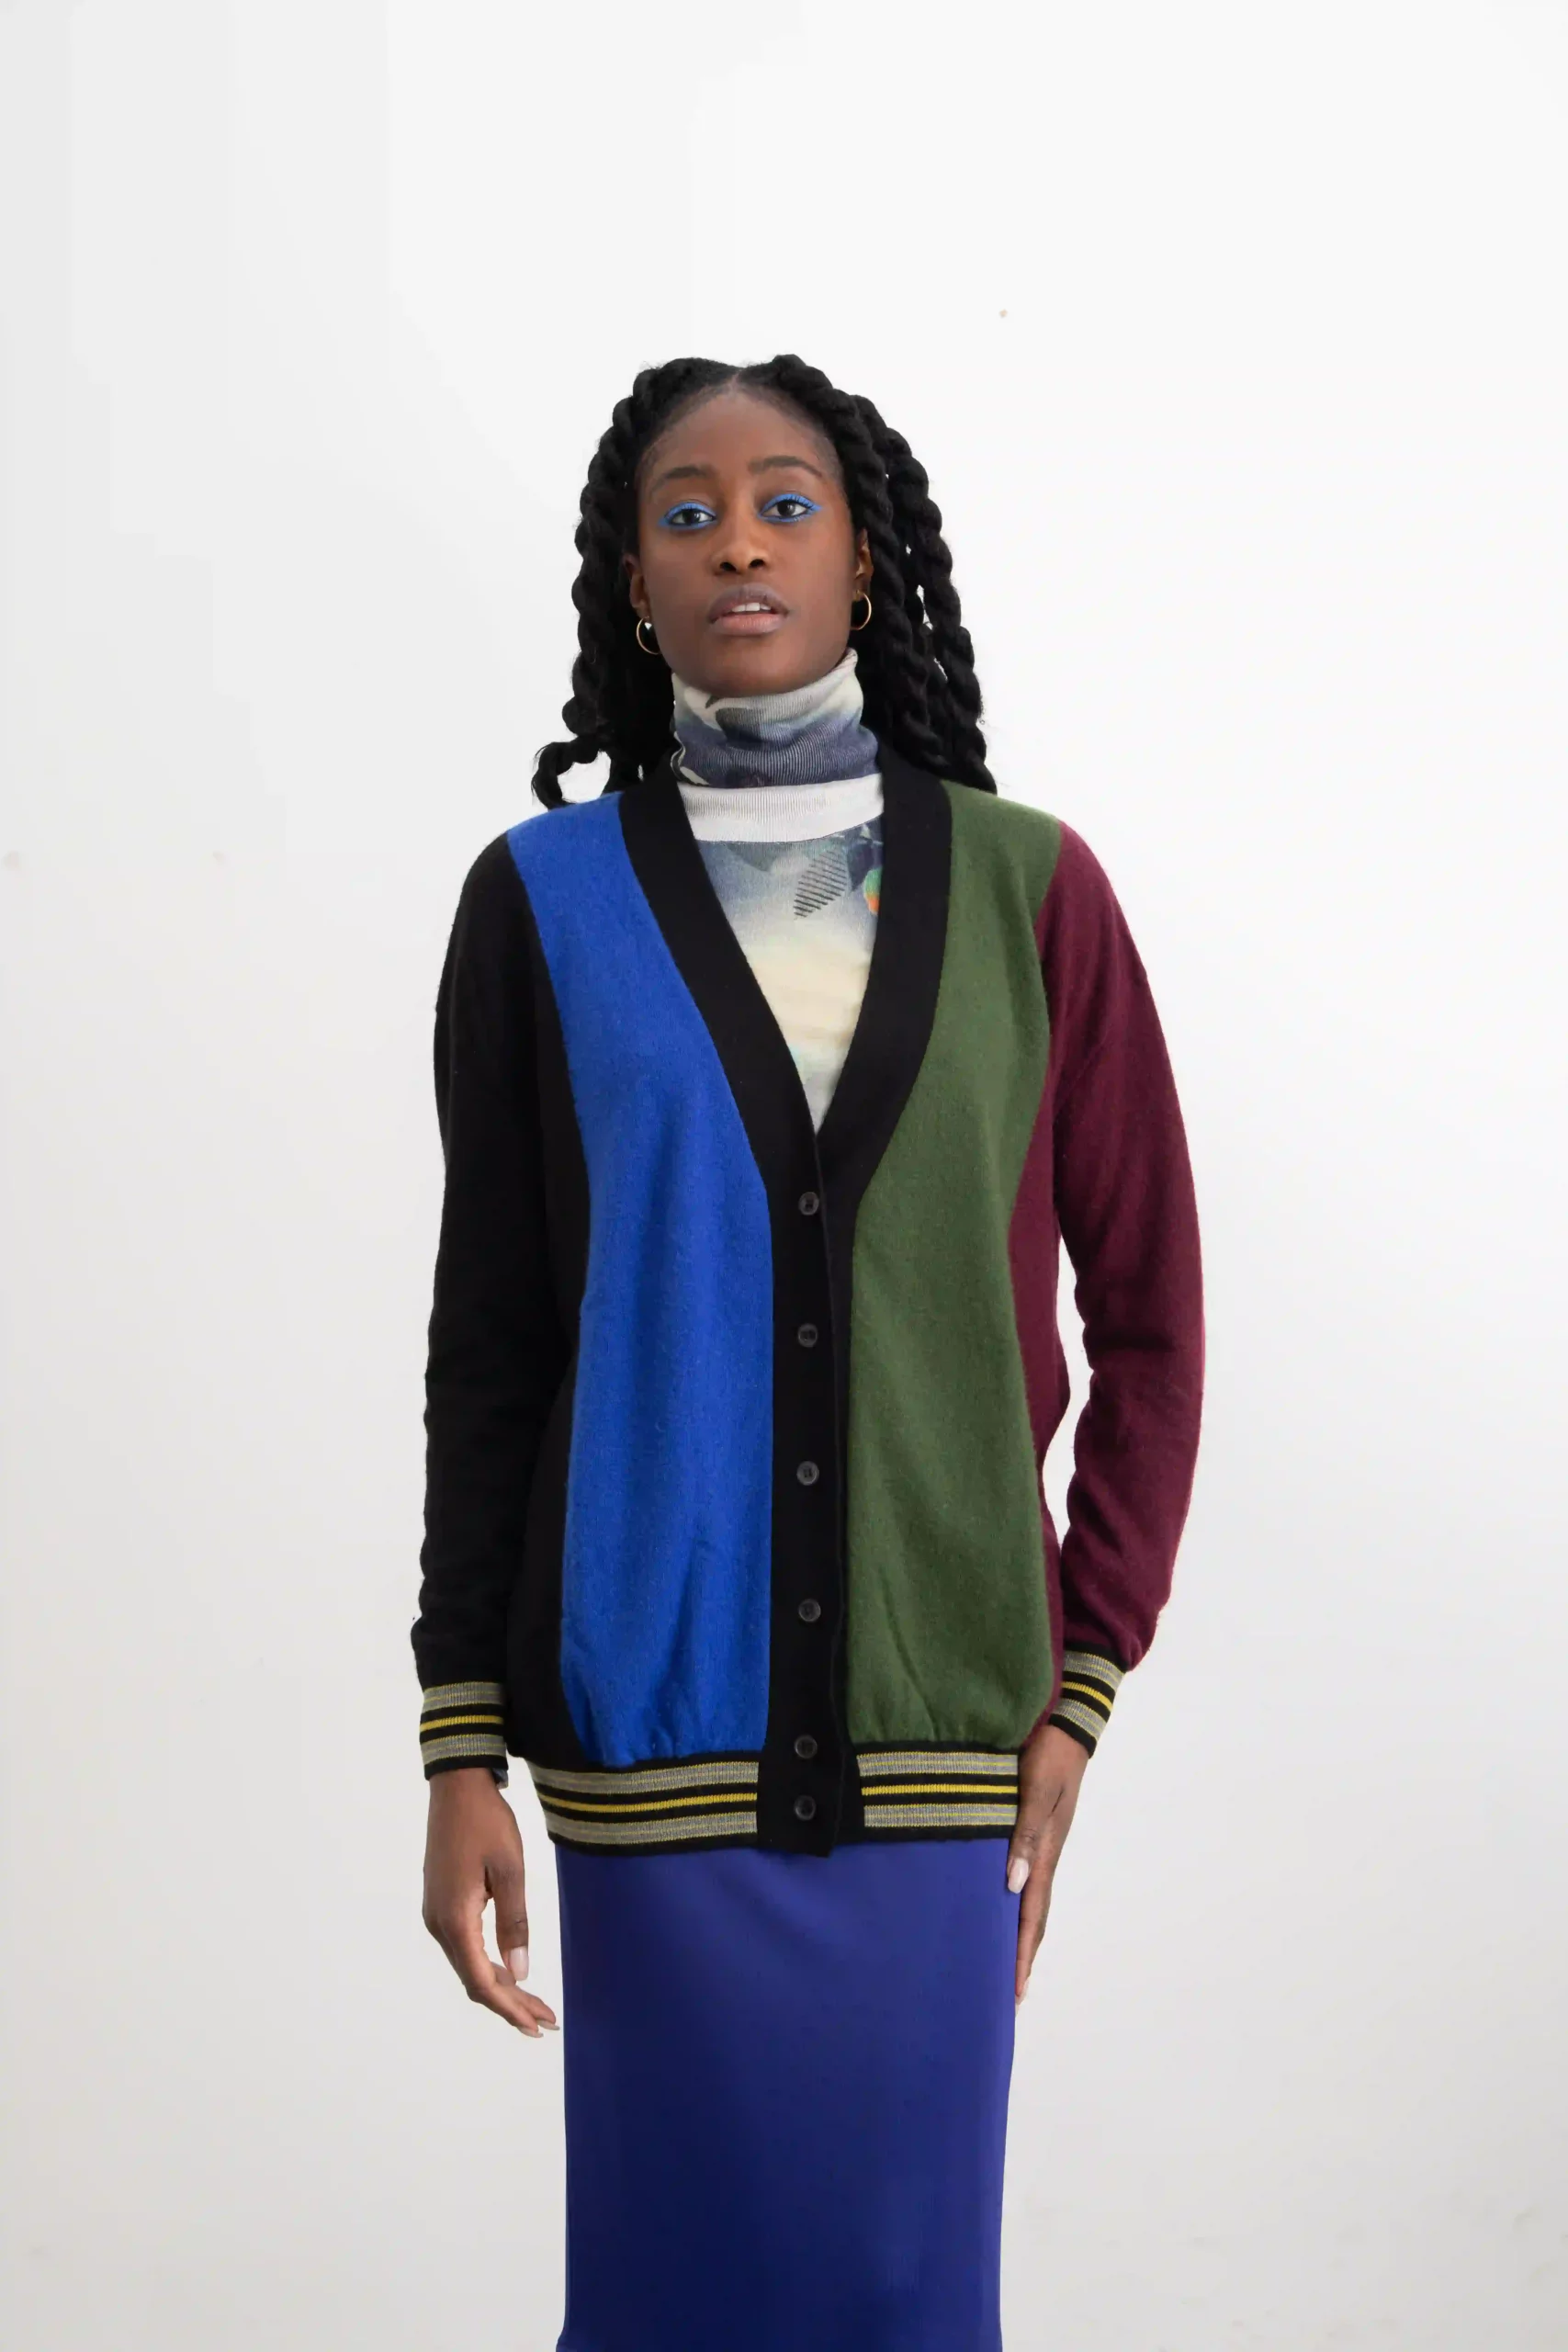 Marni multicolored, banded cardigan, black, blue, green, burgundy. Made of 75% cashmere and 25% virgin wool, very soft. With yellow gray striped cuffs and bottom.